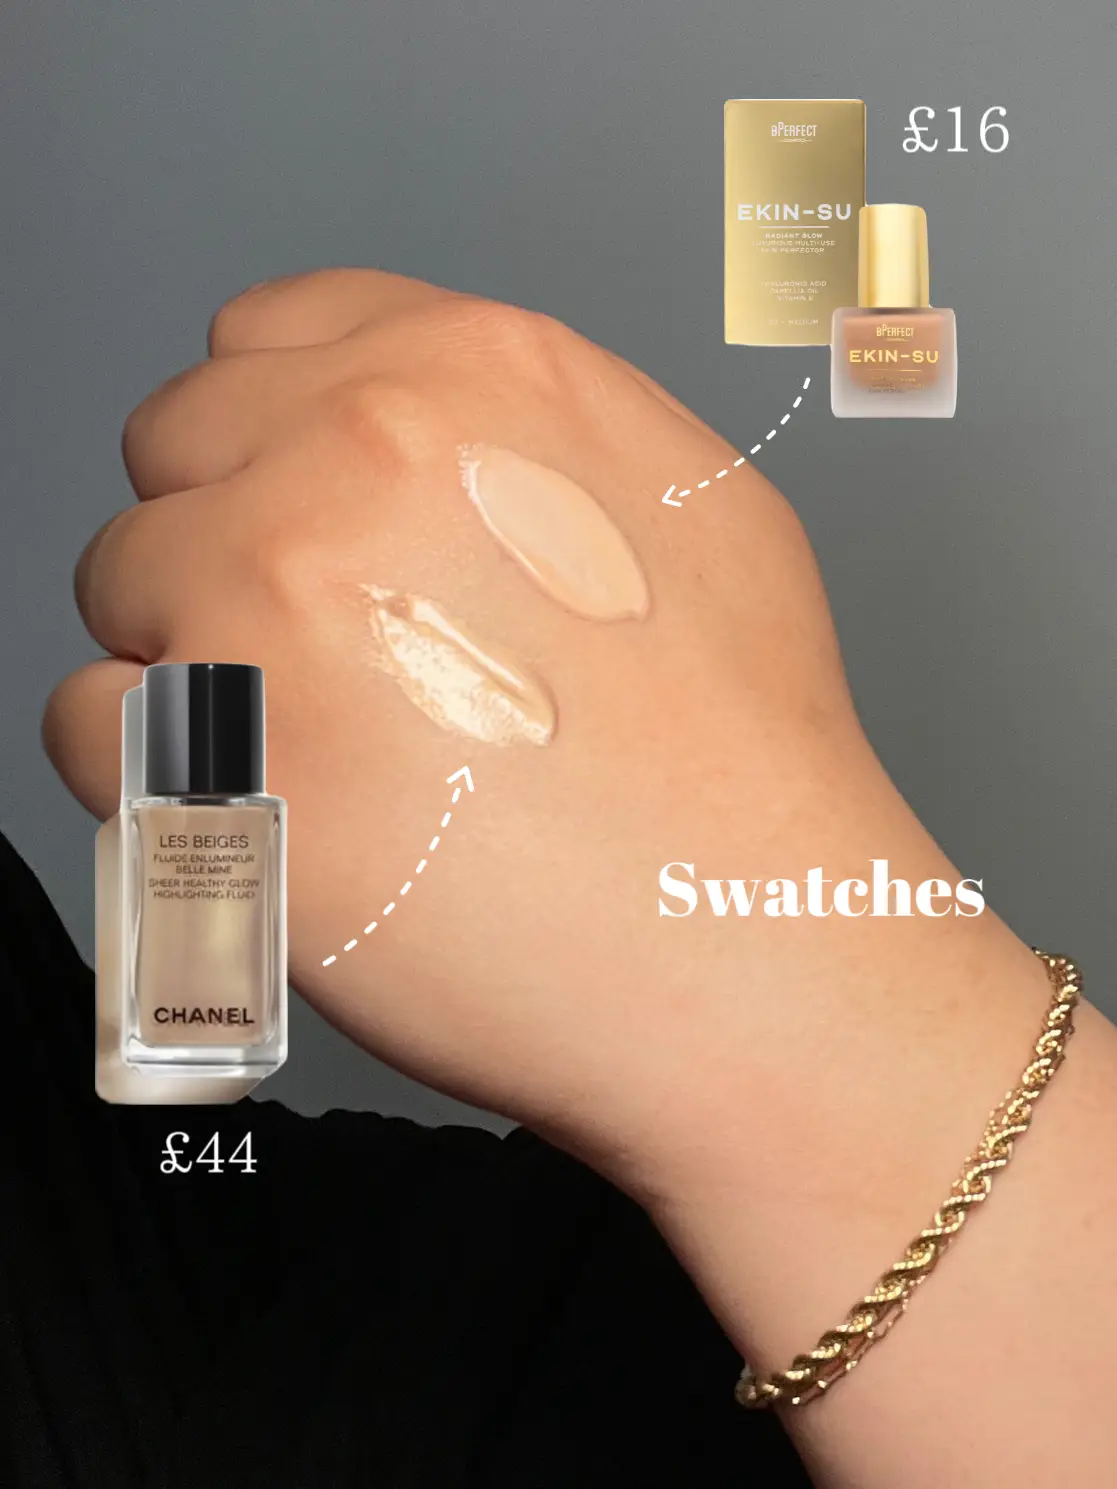 Chanel Les Beiges dupe ☀️, Gallery posted by Fatimaxbeauty